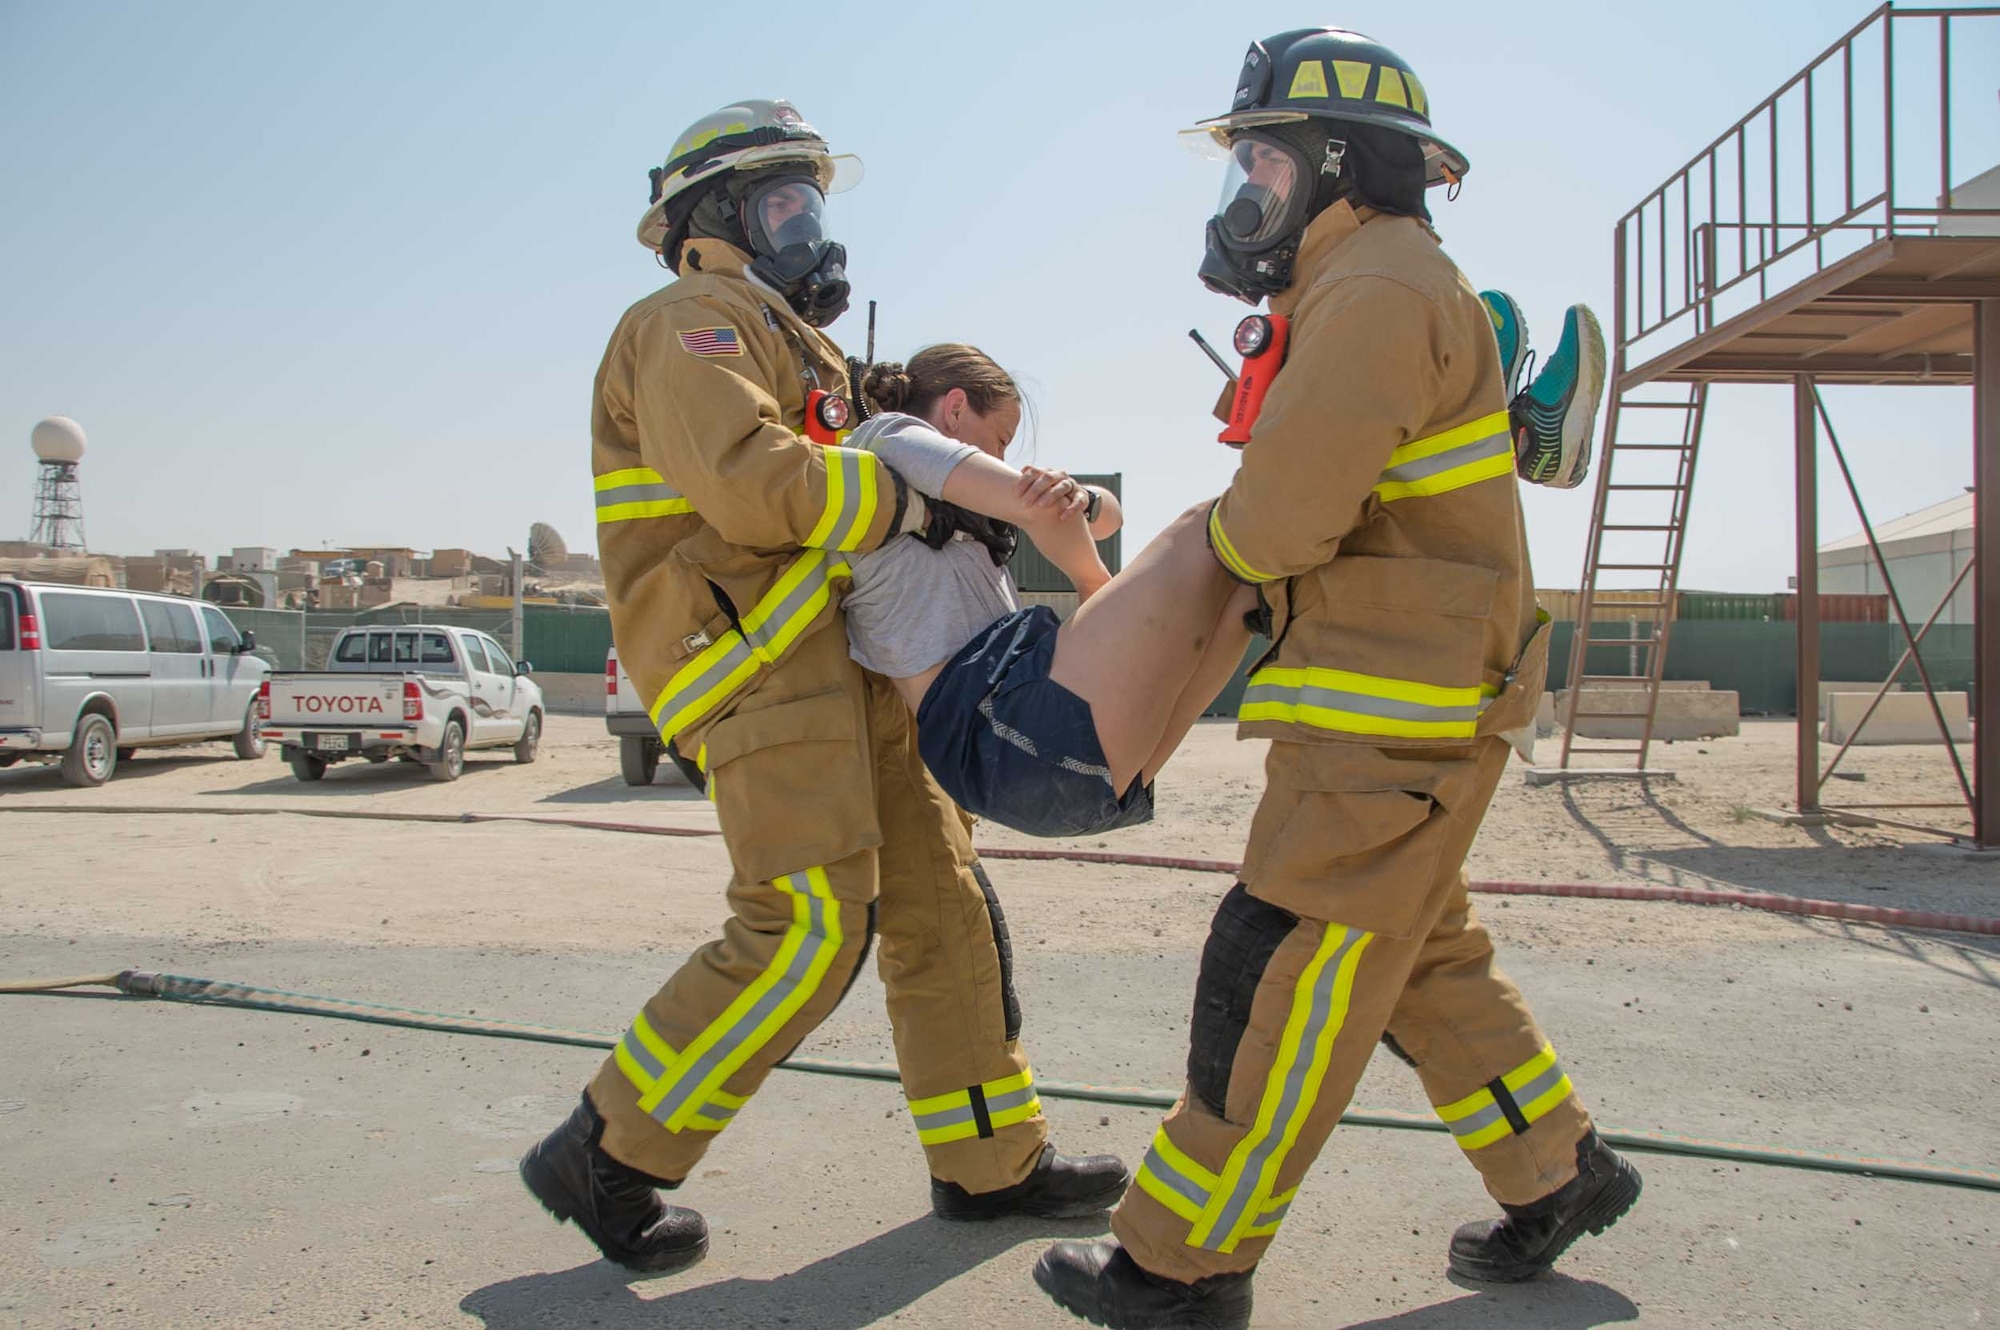 A team of firefighters perform a two-man carry during a victim extraction during a training scenario Friday, August 11, 2017, at the PERSCO building at an undisclosed location in Southwest Asia. (U.S. Air Force photo by 1st Lt. Rashard Coaxum)